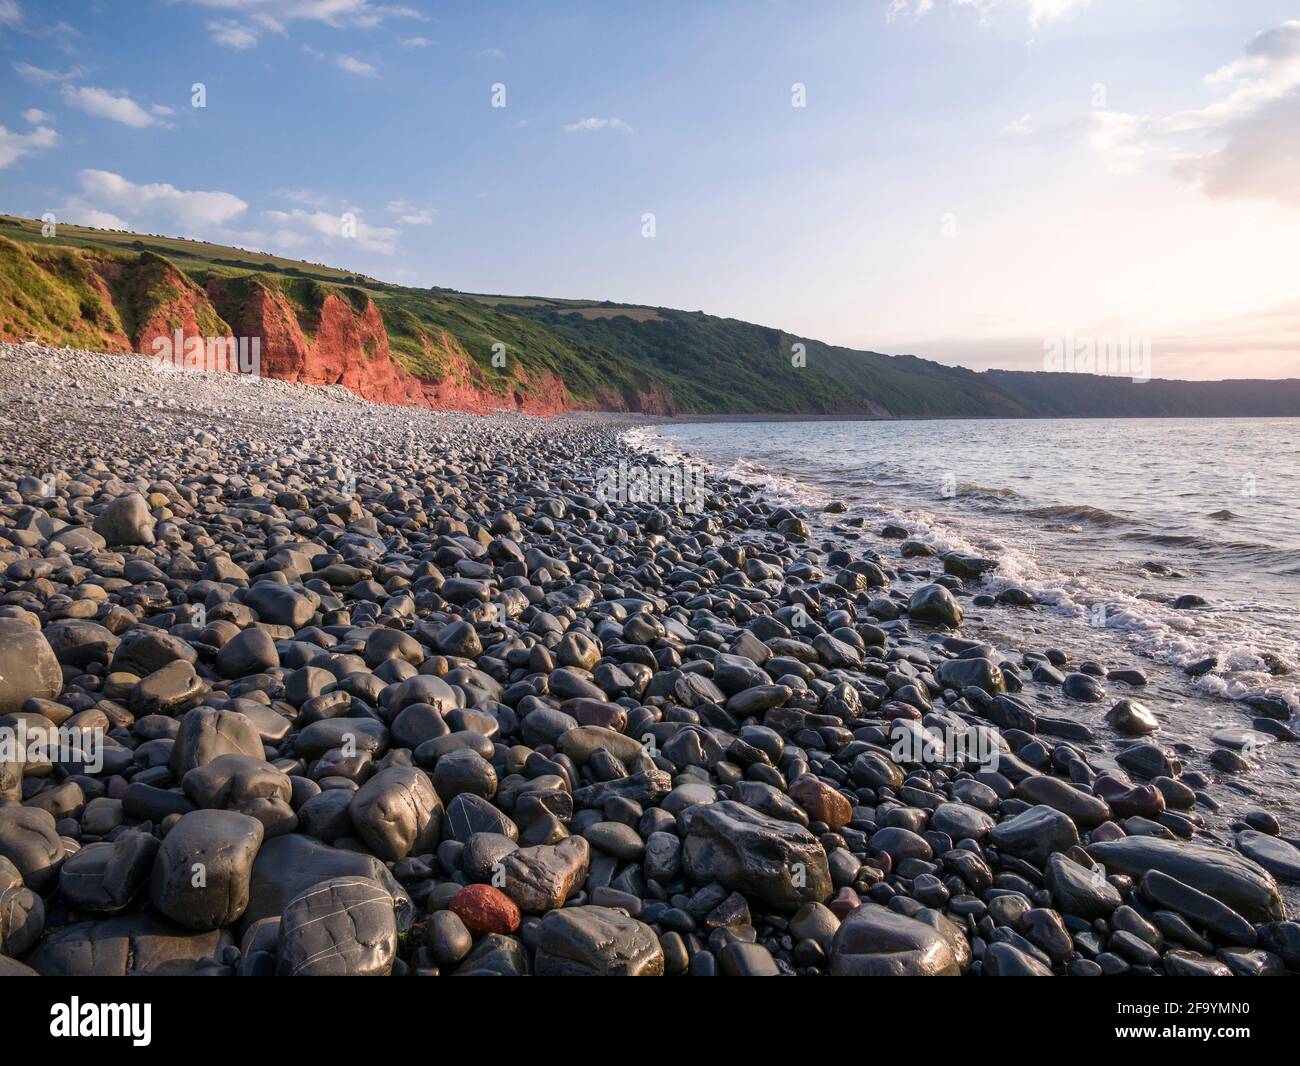 The beach and cliffs at Peppercombe on the North Devon coast, England. Stock Photo